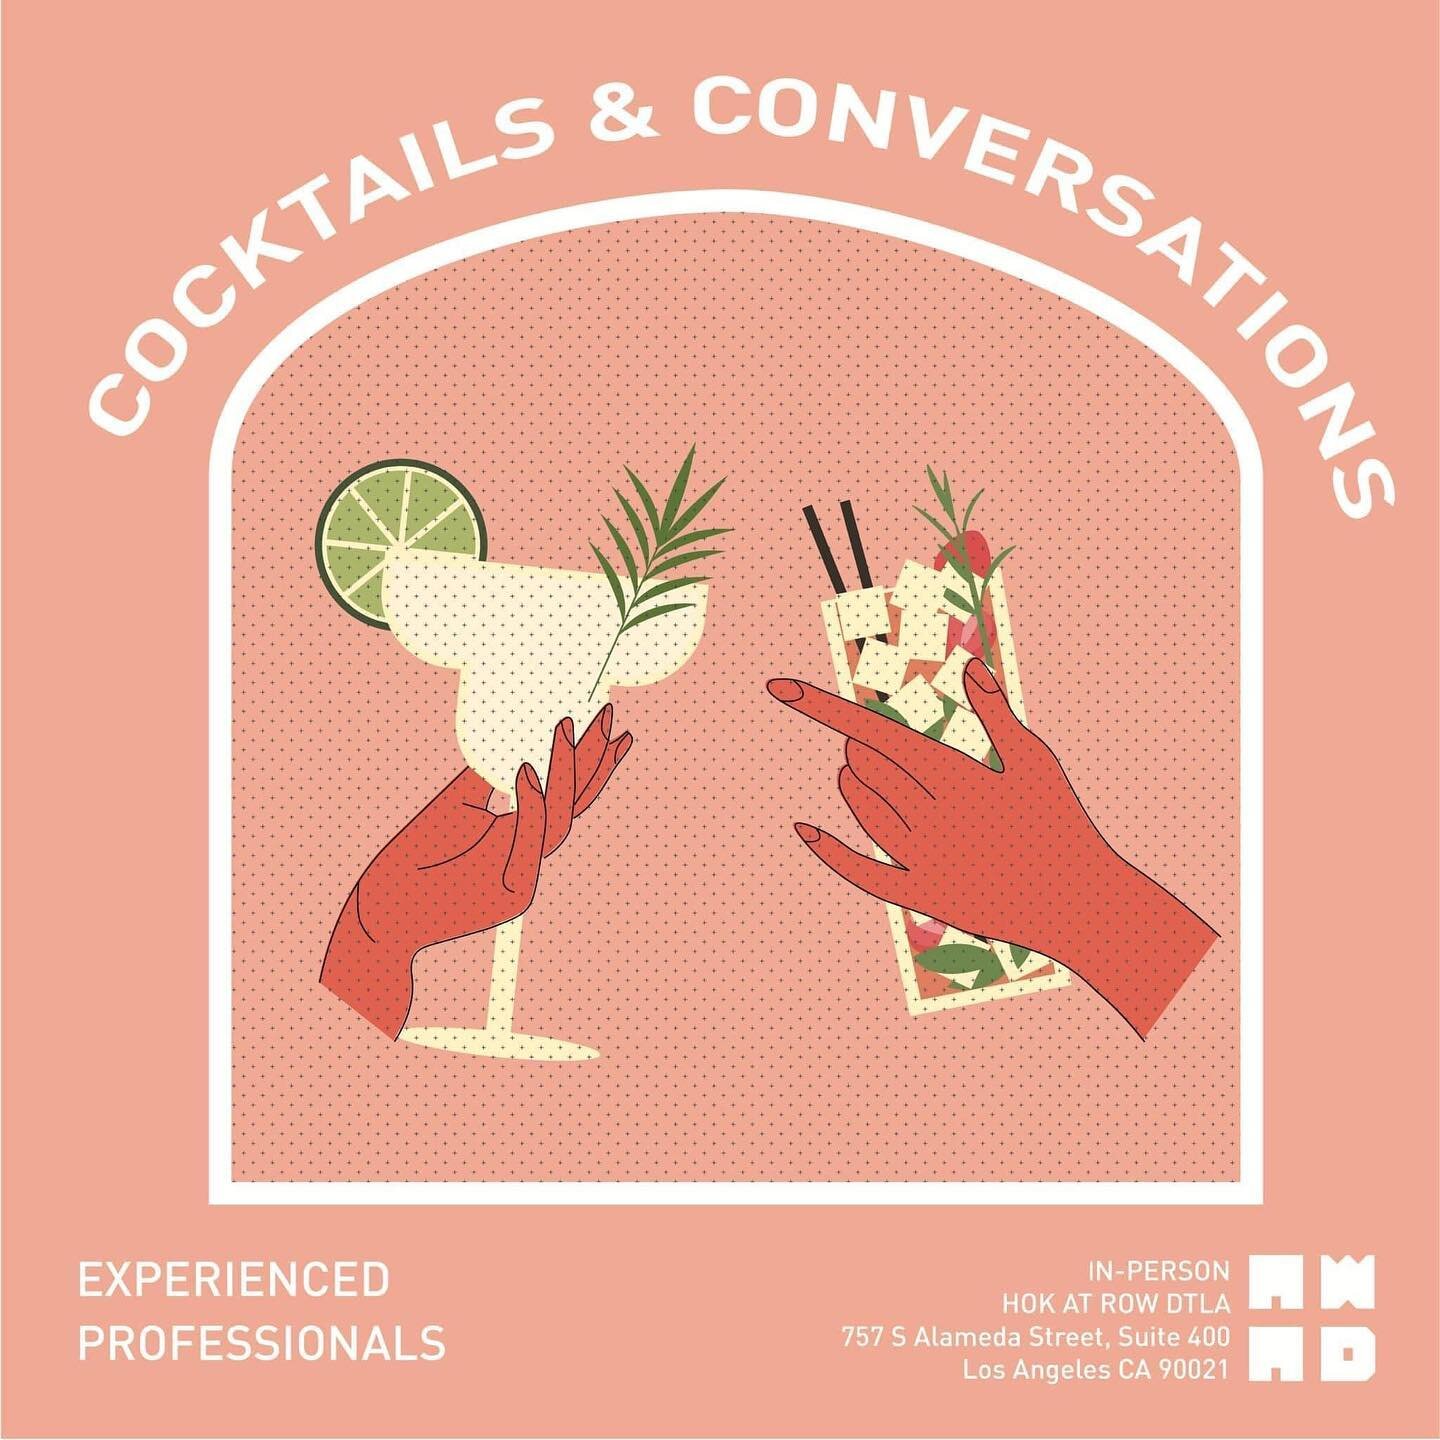 This Wednesday, Experienced Professionals &ndash; Cocktails + Conversations (in-person)

Wednesday, 05/17 @ 6:00pm PDT 
📍 HOK 
757 S. Alameda St. Suite 400
Los Angeles, CA 90021

Join us to talk shop, talk about work, talk about life and provide som